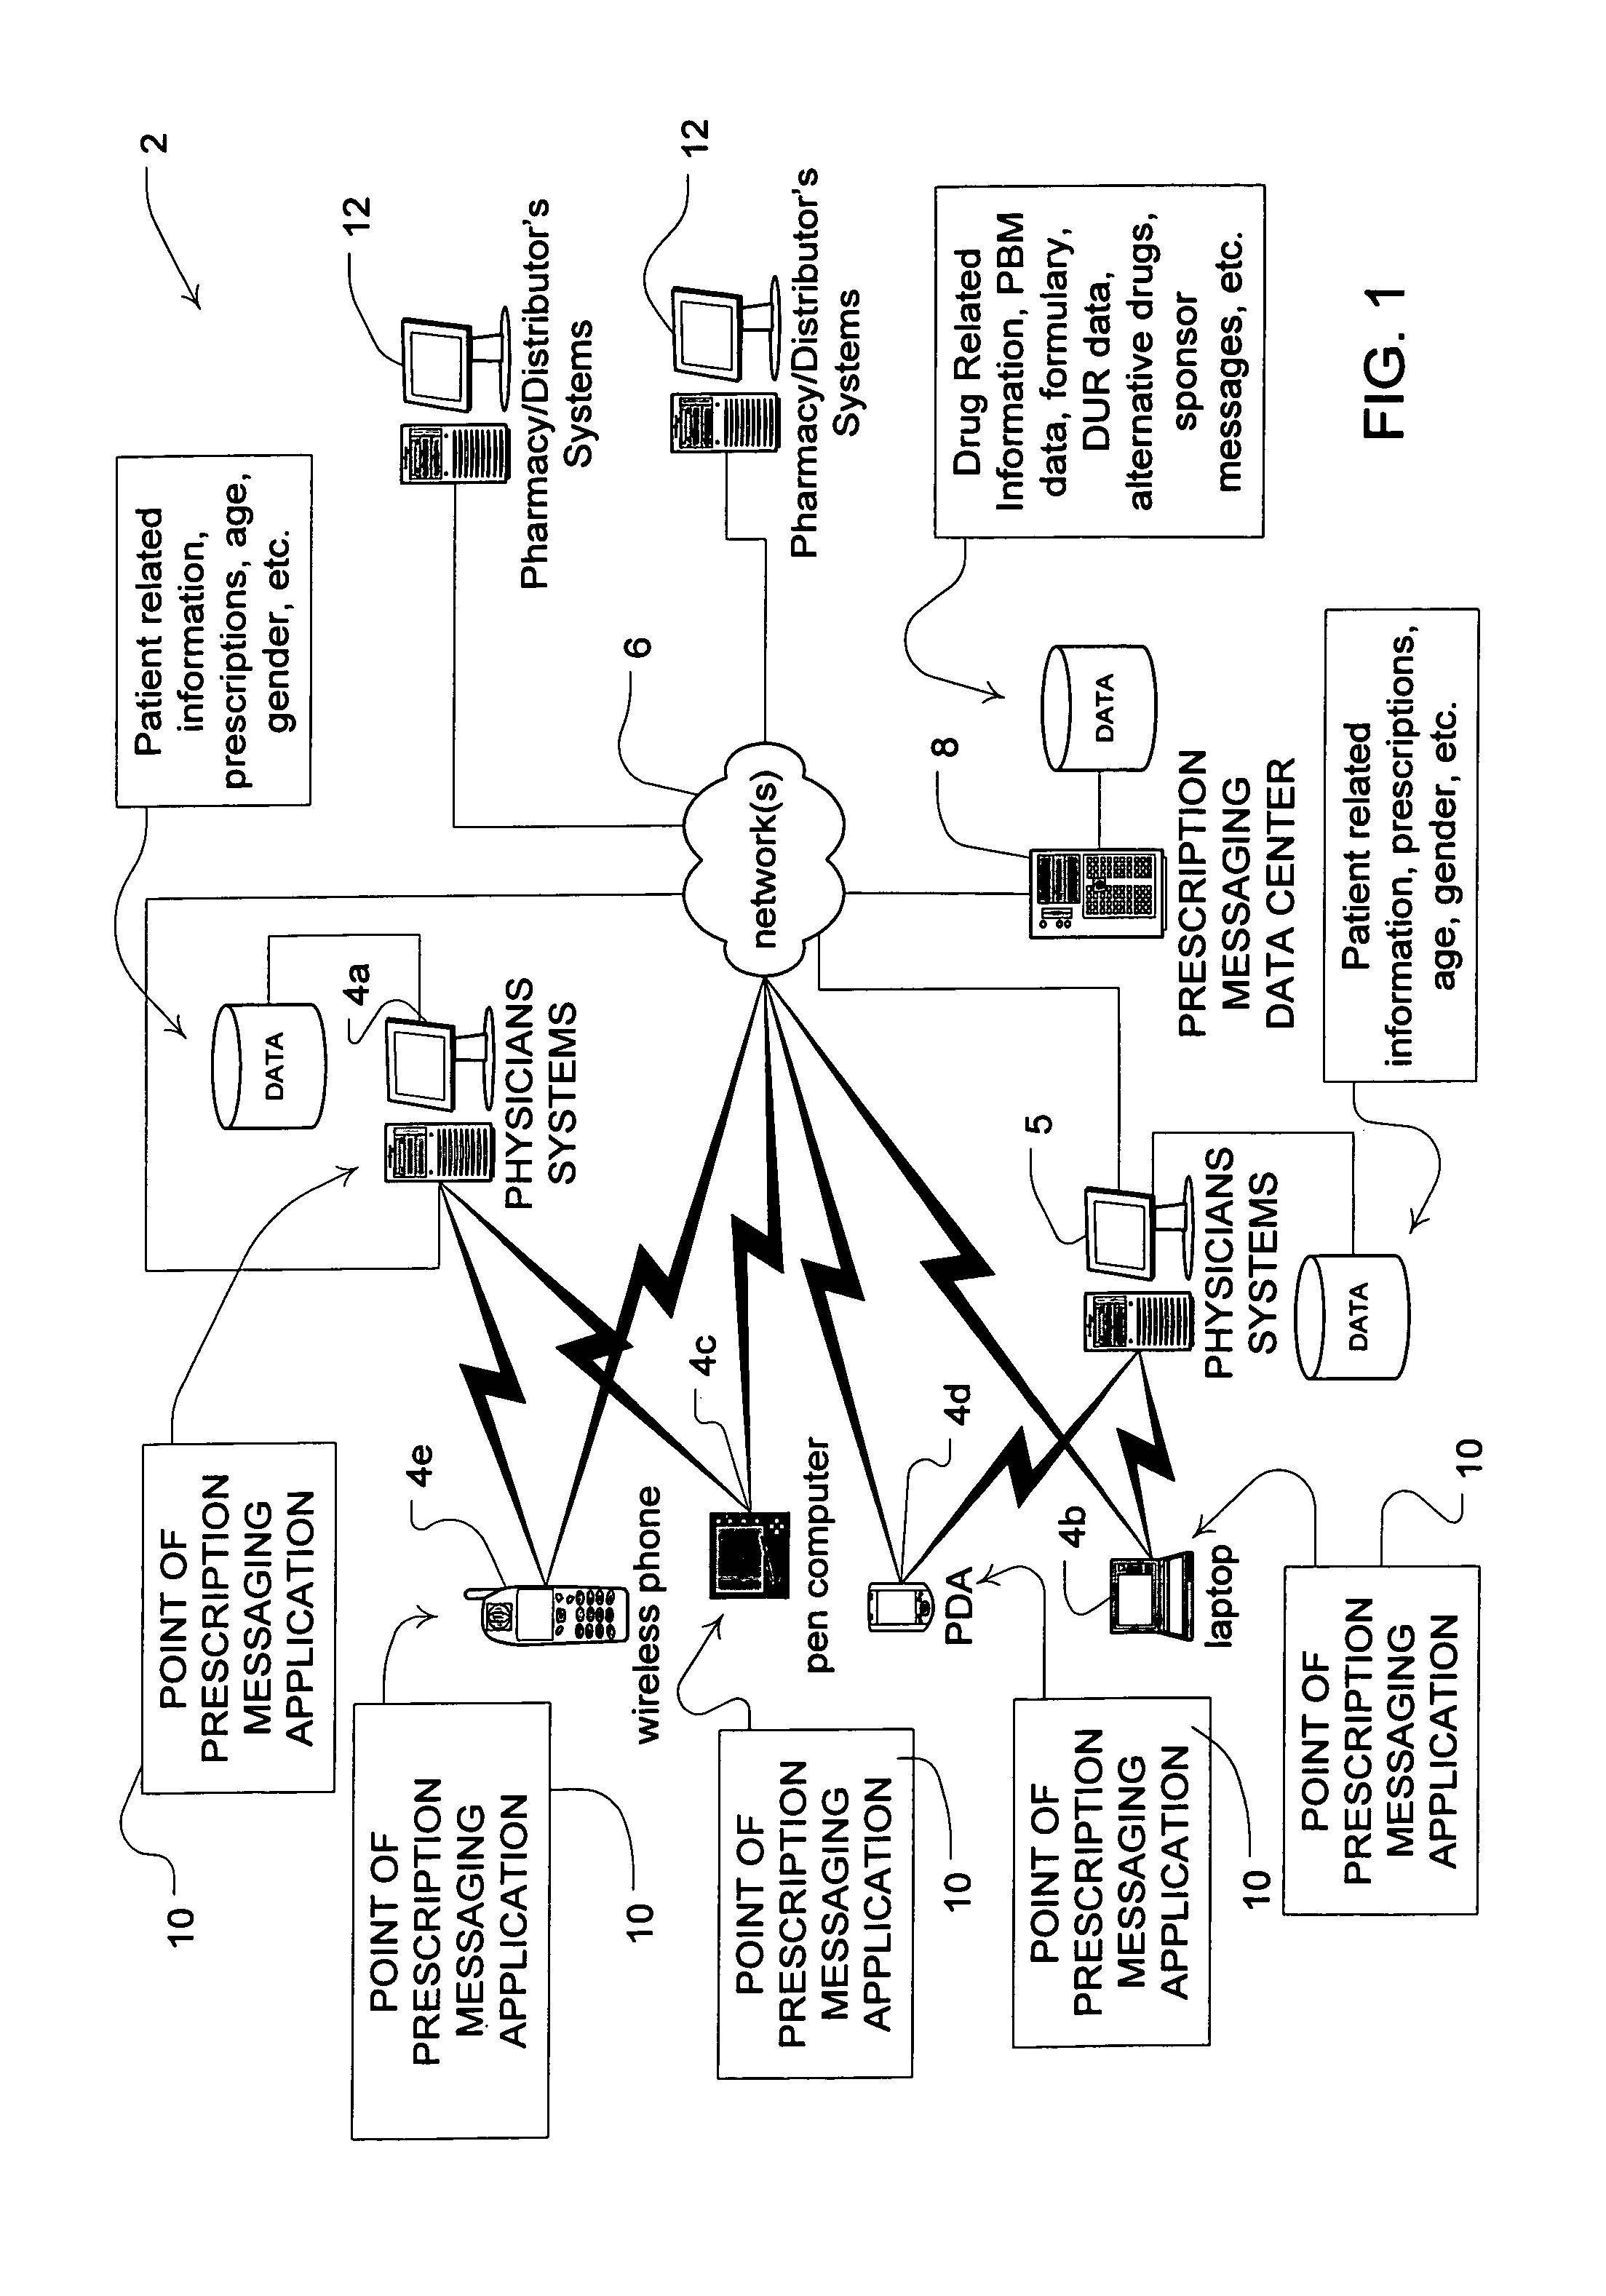 Systems and methods for wireless prescription advertising